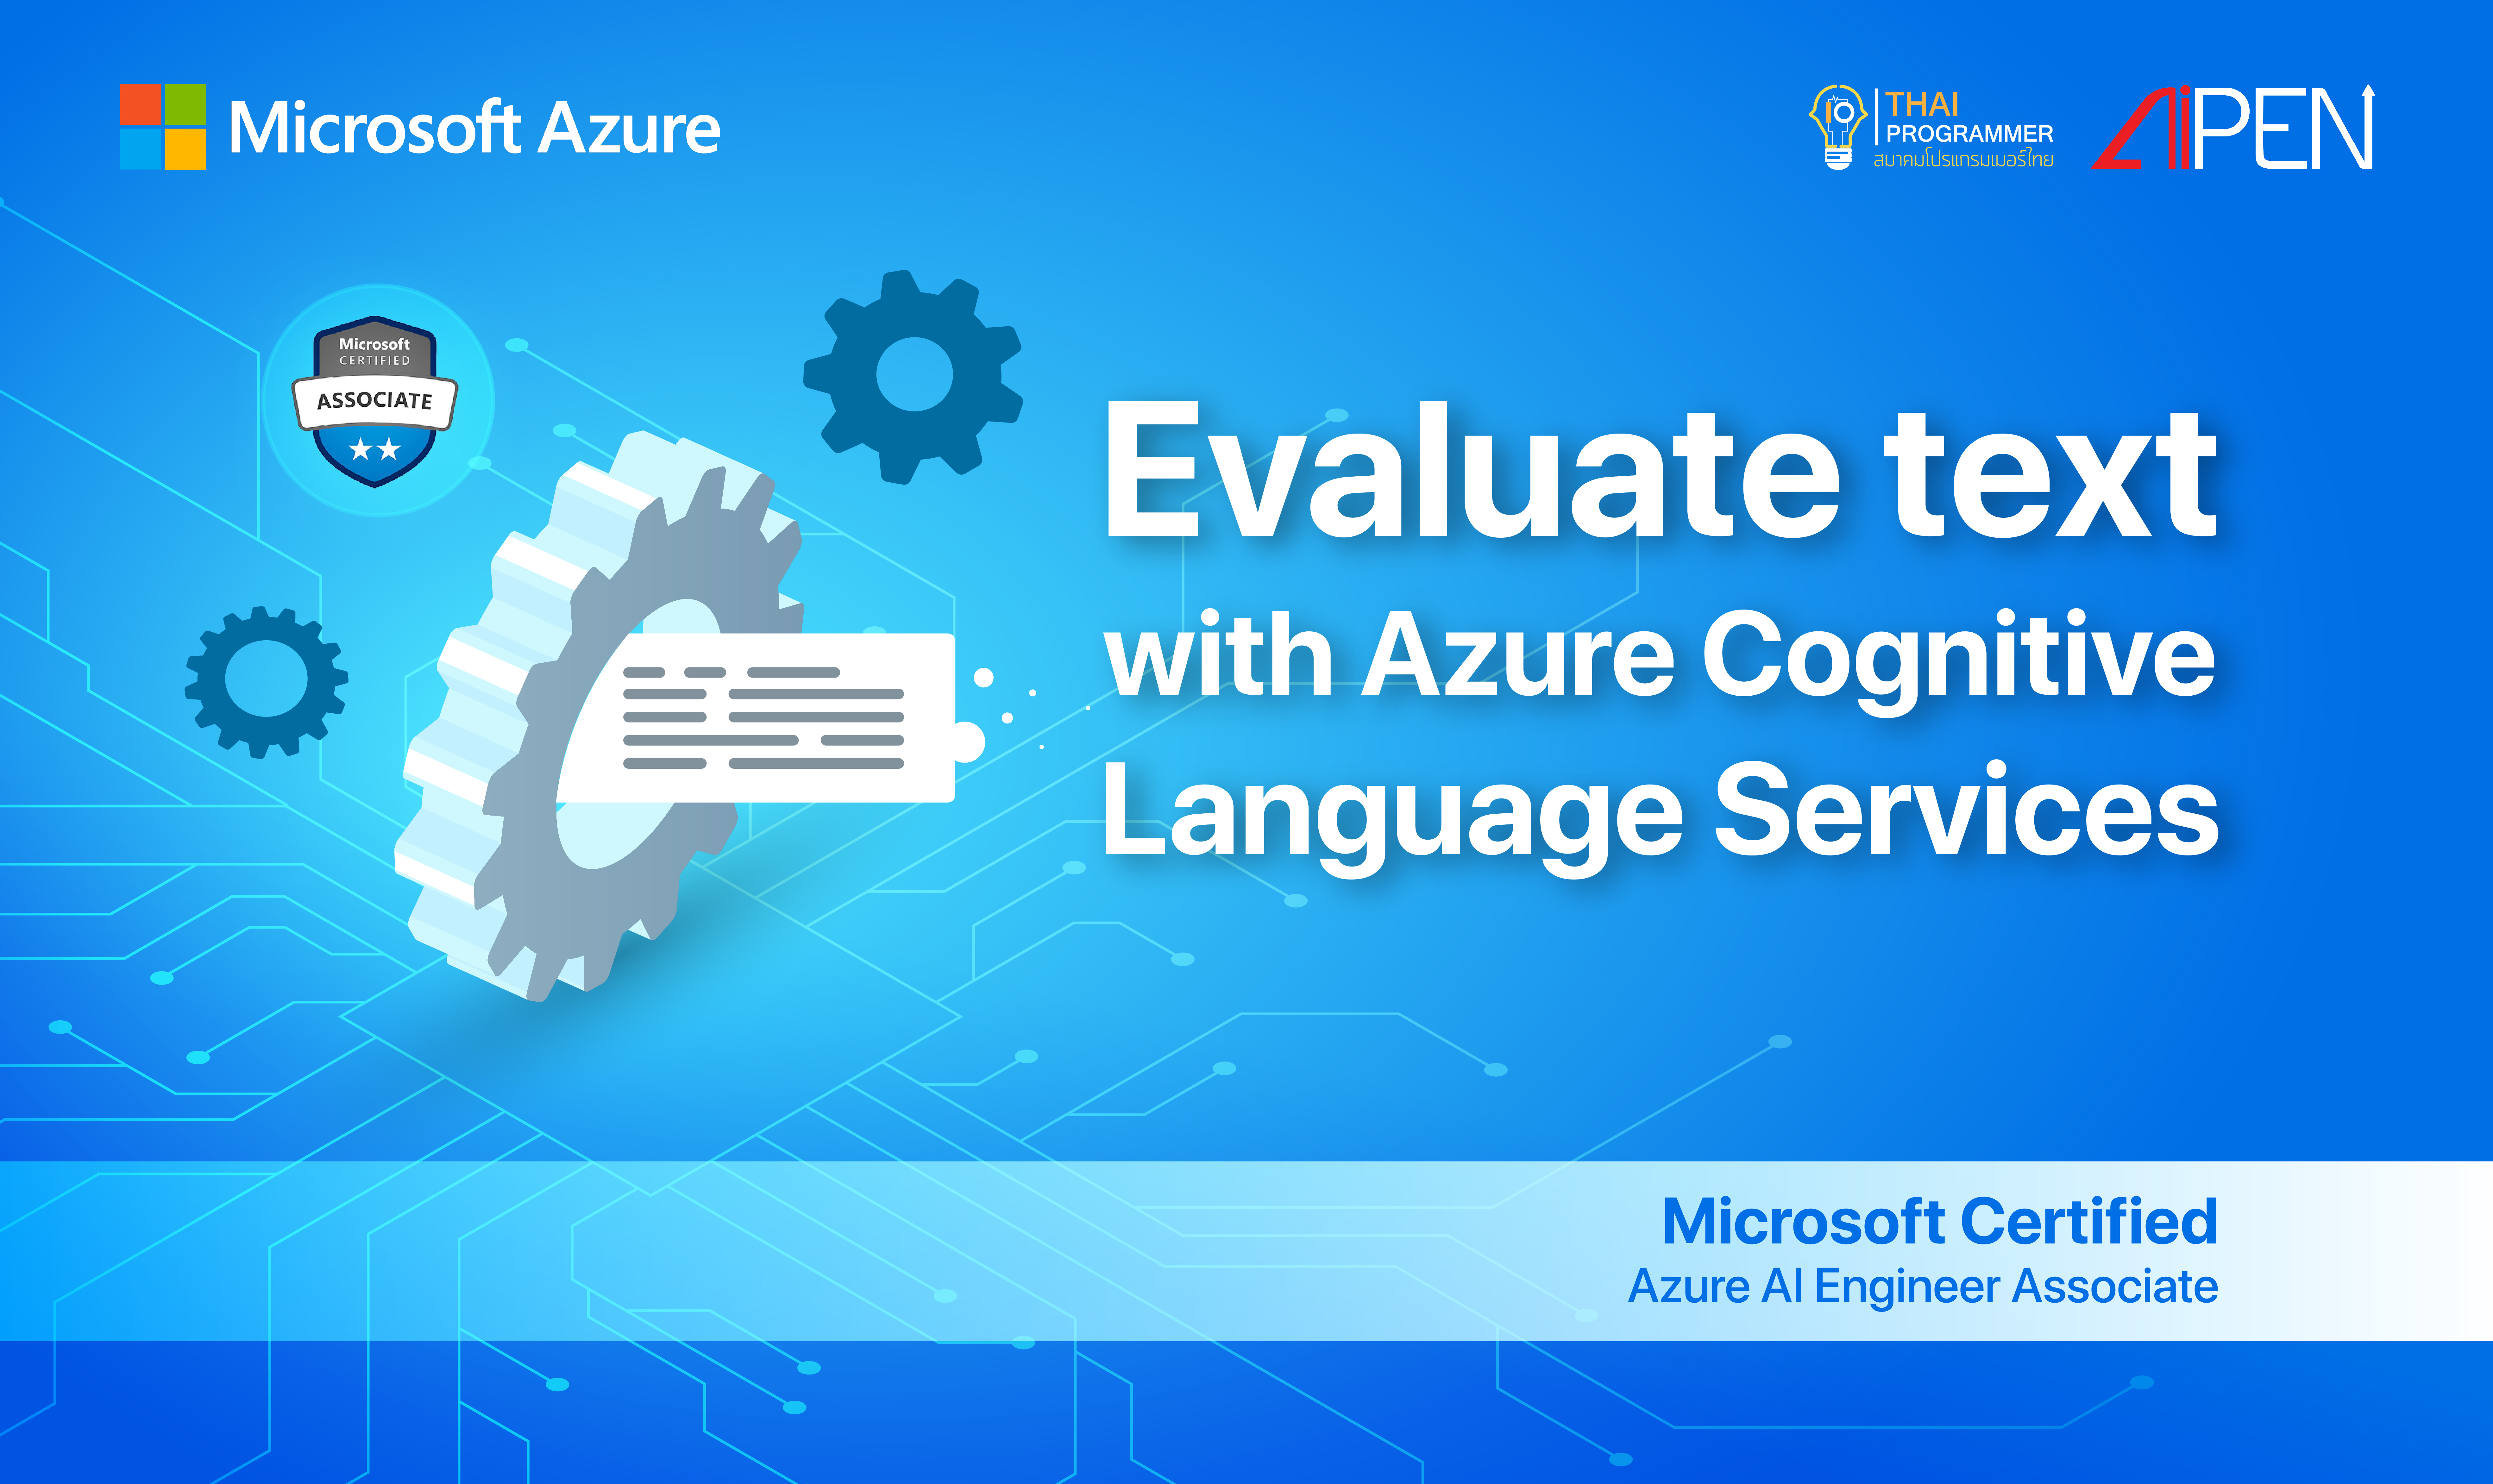 Microsoft Azure : Evaluate text with Azure Cognitive Language Services